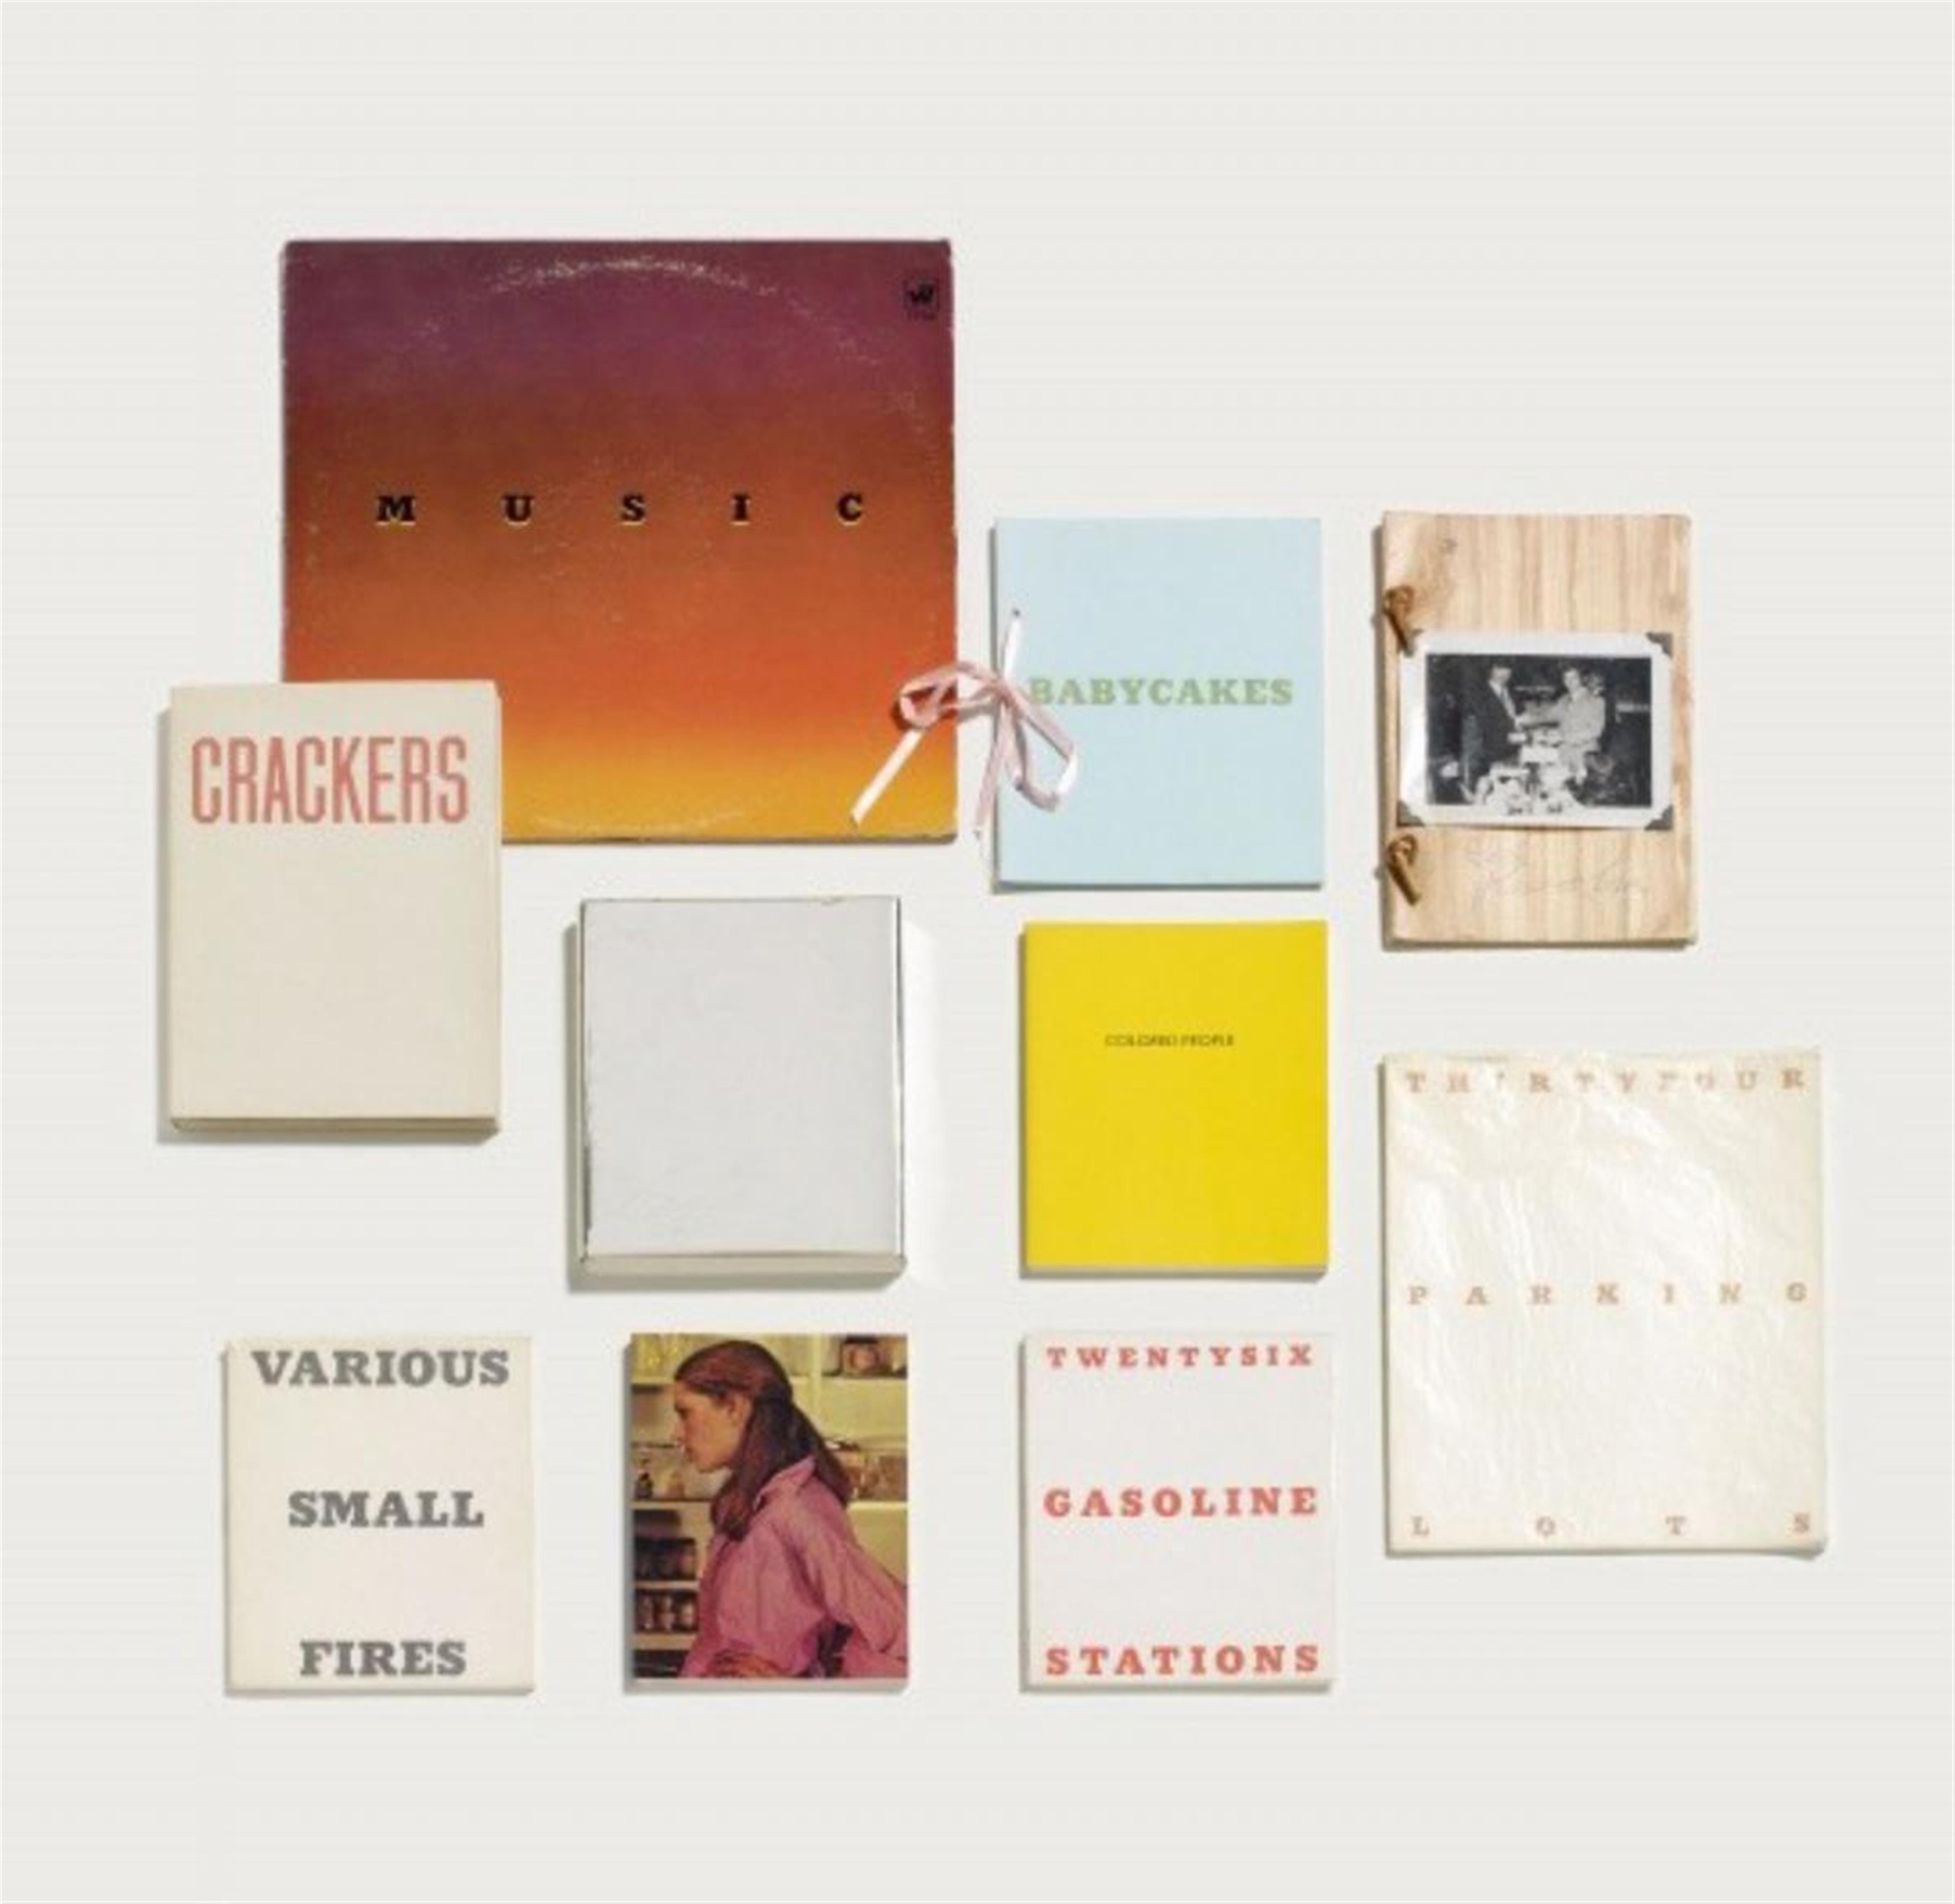 Ed Ruscha - Twentysix Gasoline Stations. Various Small Fires. The Sunset Strip. Thirtyfour Parking Lots. Business Cards. Crackers. Babycakes with weights. Colored People. Hard Light. Edward Ruscha, Prints and Publications. Joe Goode, Edward Ruscha. News Mews Pews... - image-1